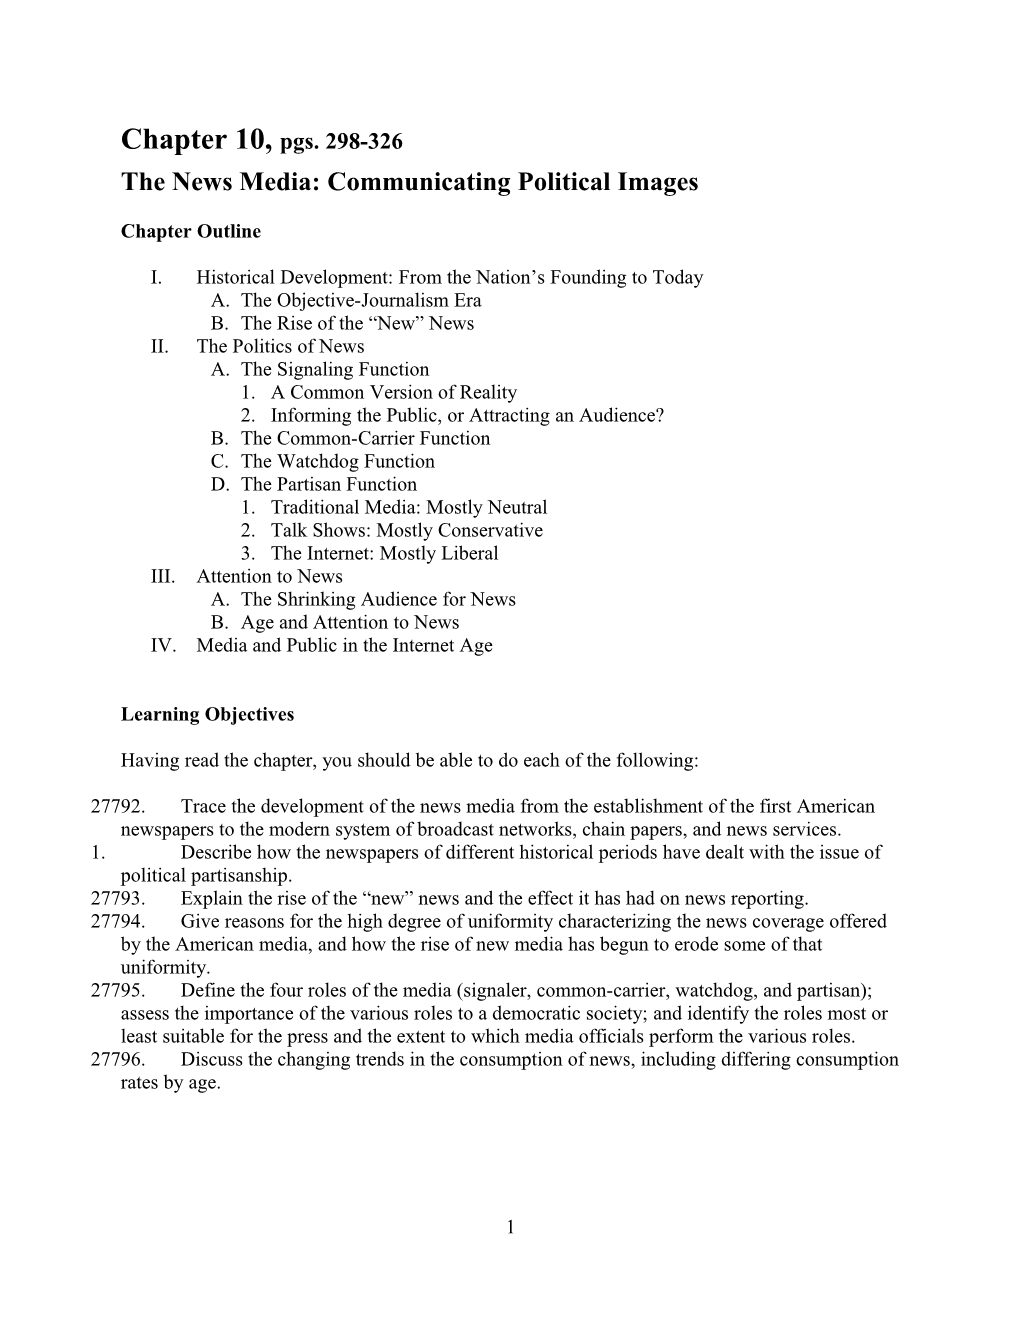 The News Media: Communicating Political Images